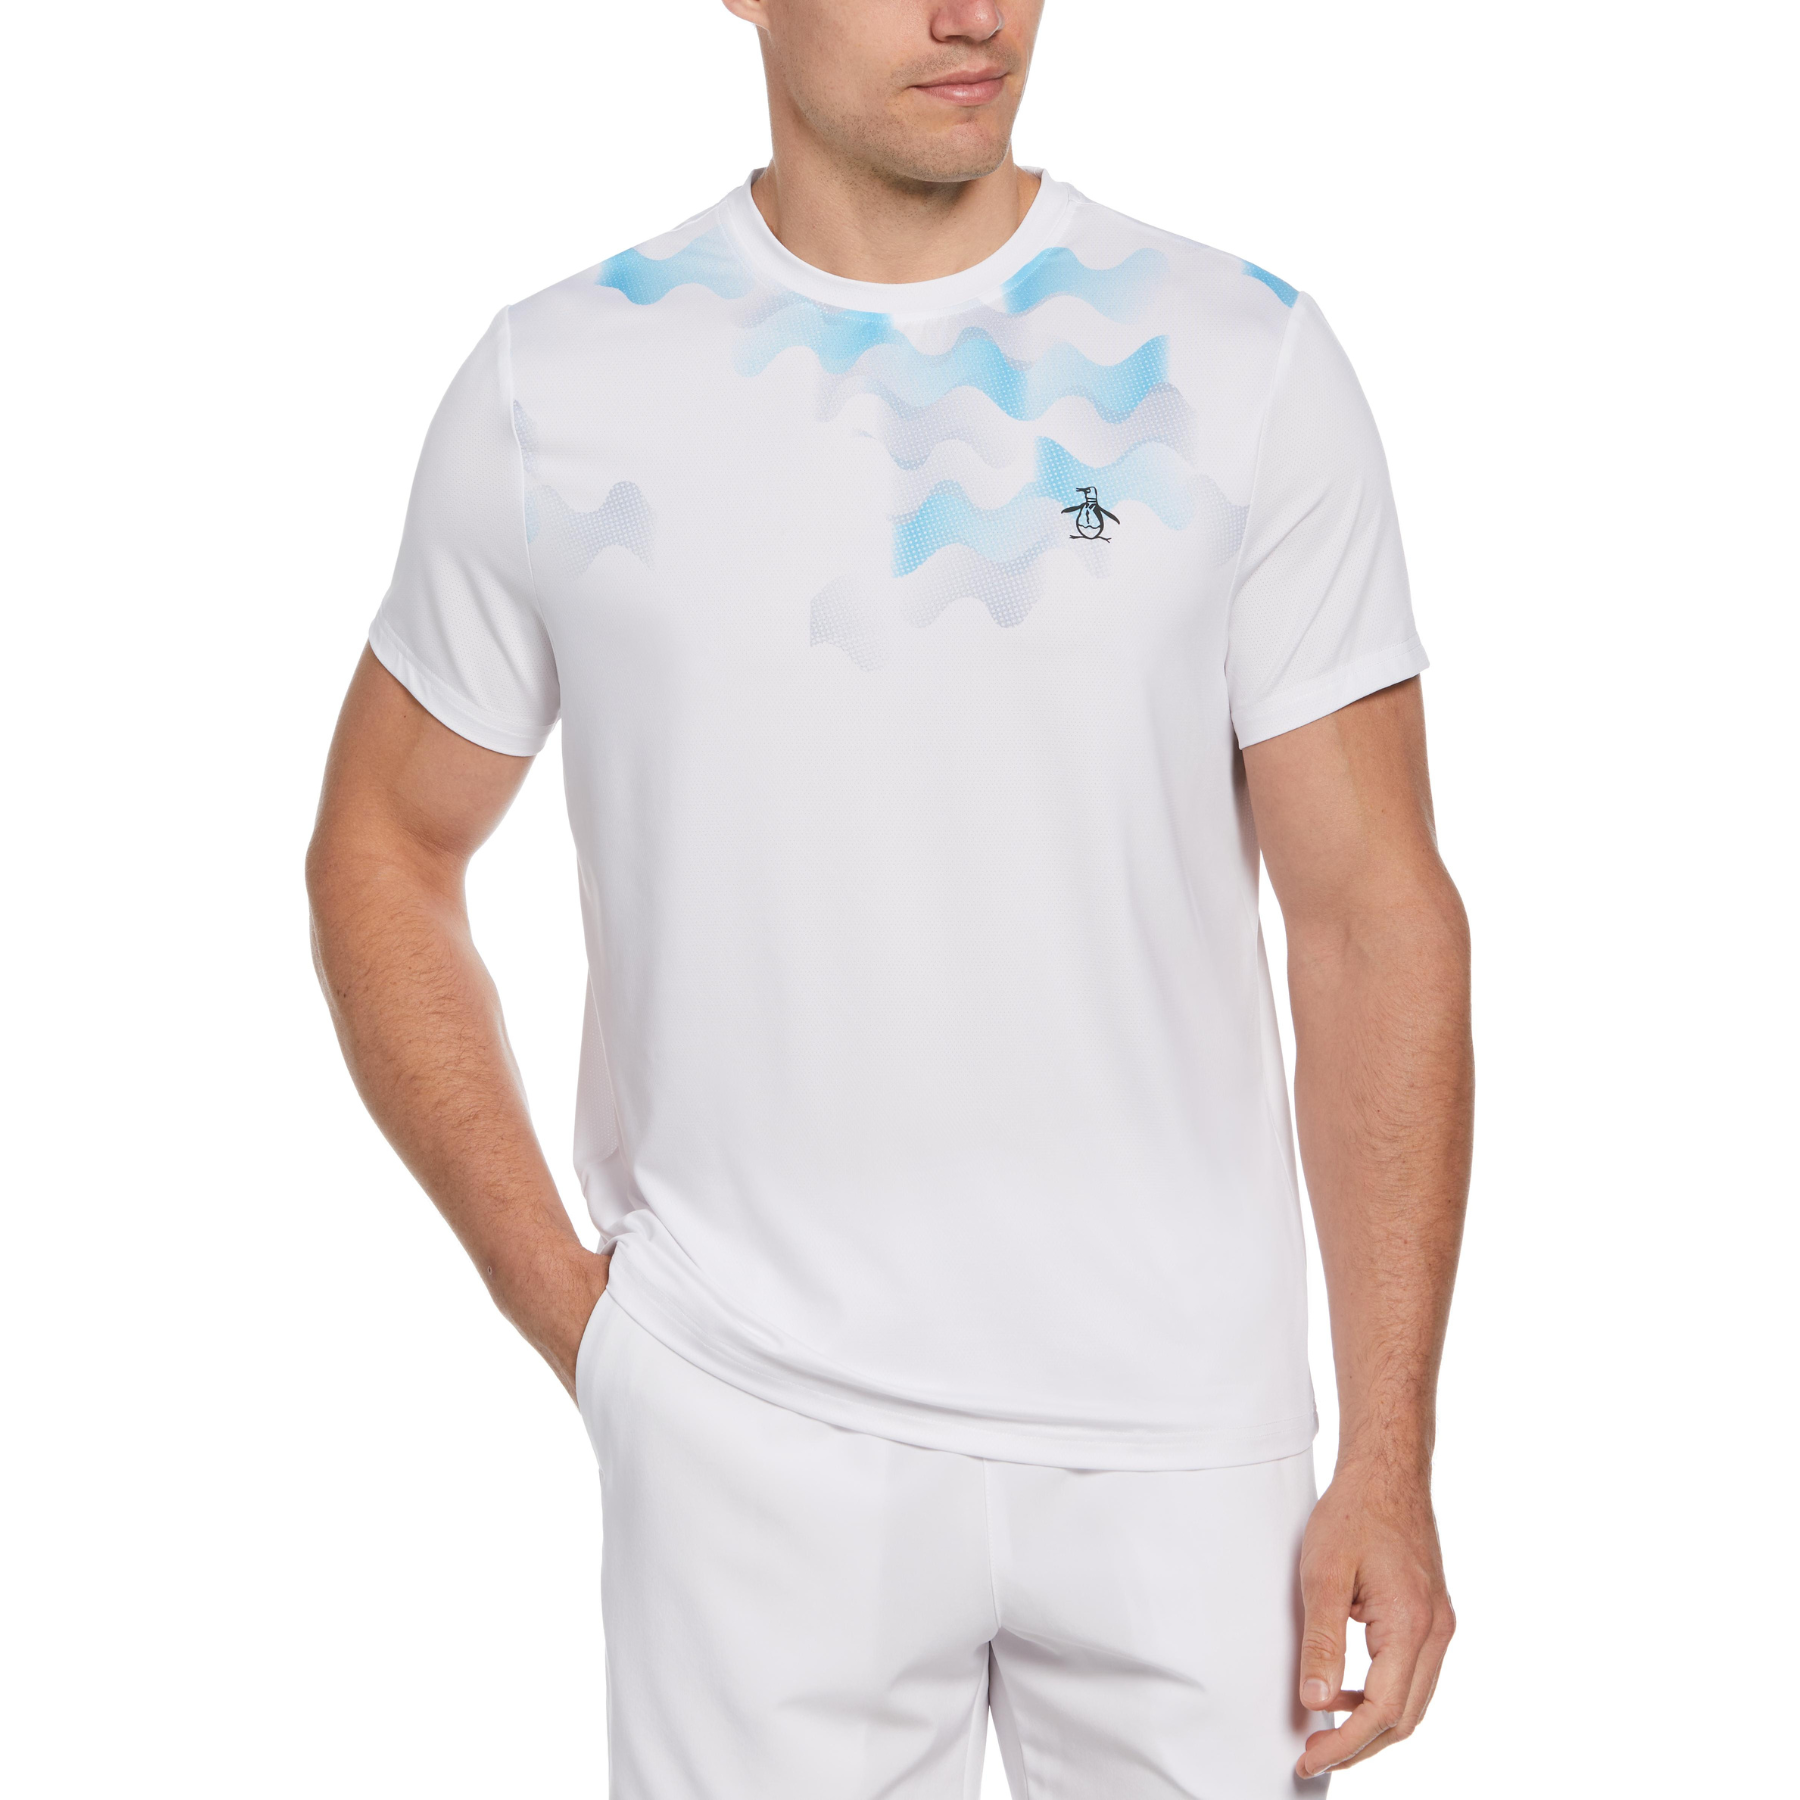 View Tennis Performance Motion Ball TShirt In Bright White information